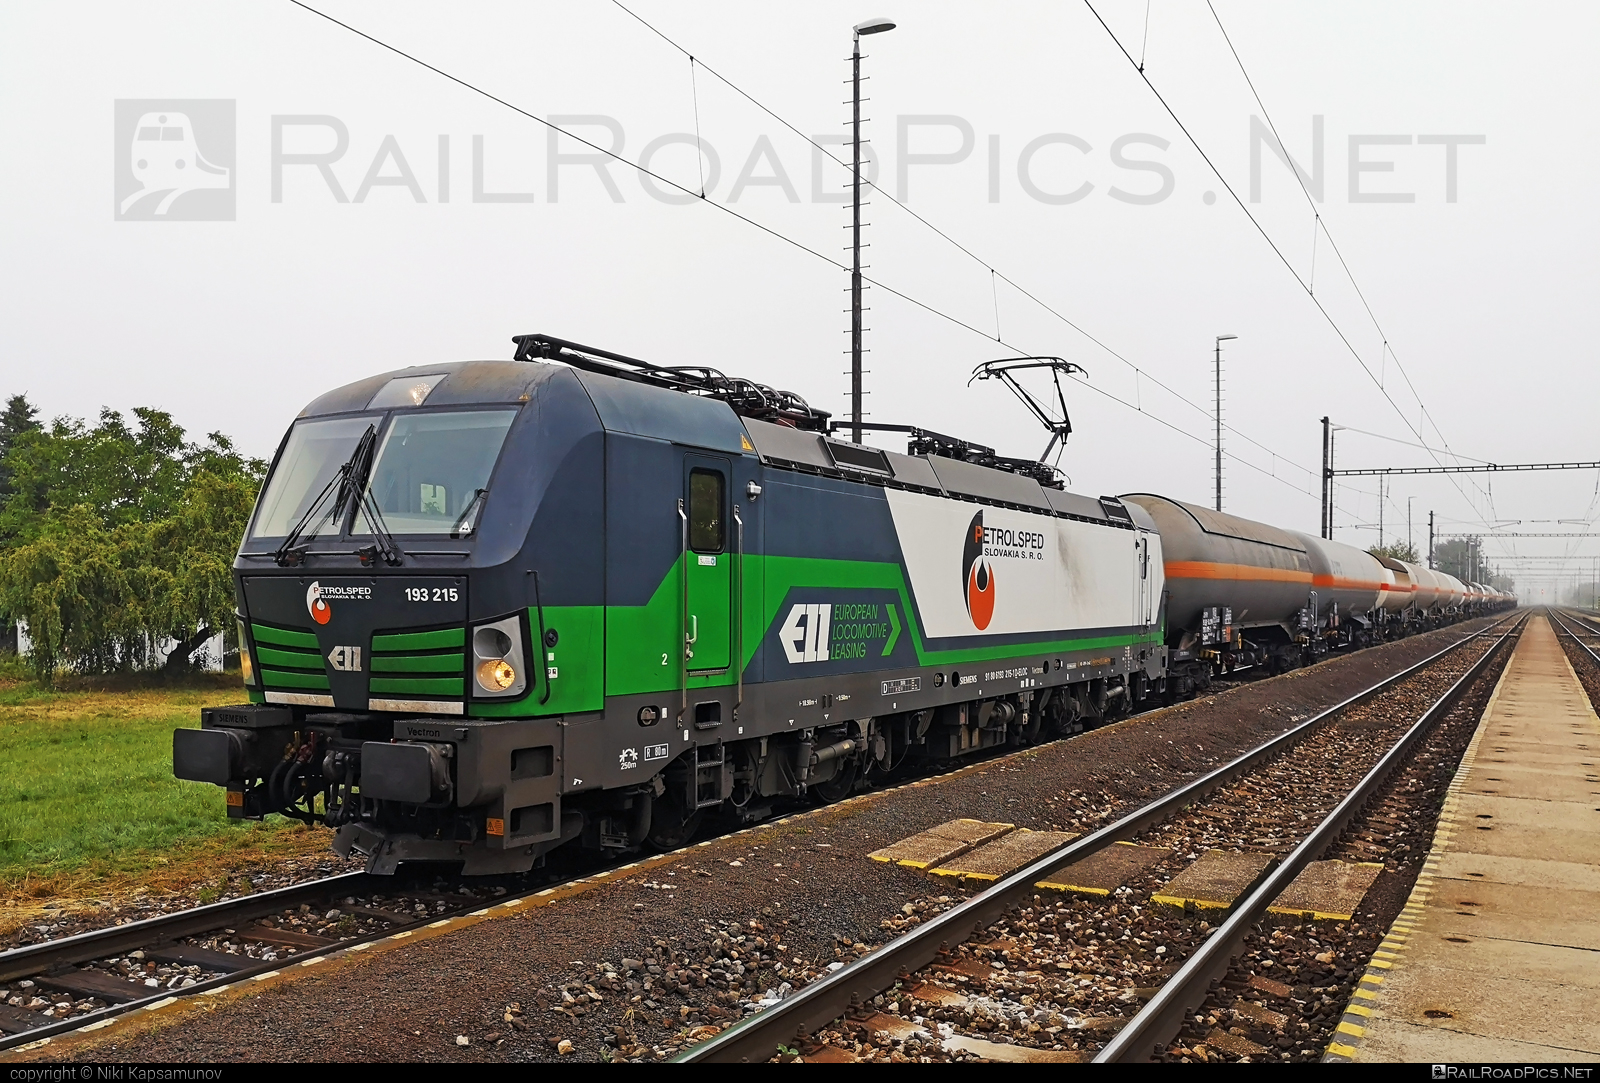 Siemens Vectron MS - 193 215 operated by PETROLSPED Slovakia s.r.o. #ell #ellgermany #eloc #europeanlocomotiveleasing #kesselwagen #petrolsped #petrolspedSlovakia #petrolspedSlovakiaSro #railLog #railLogSro #siemens #siemensvectron #siemensvectronms #tankwagon #vectron #vectronms